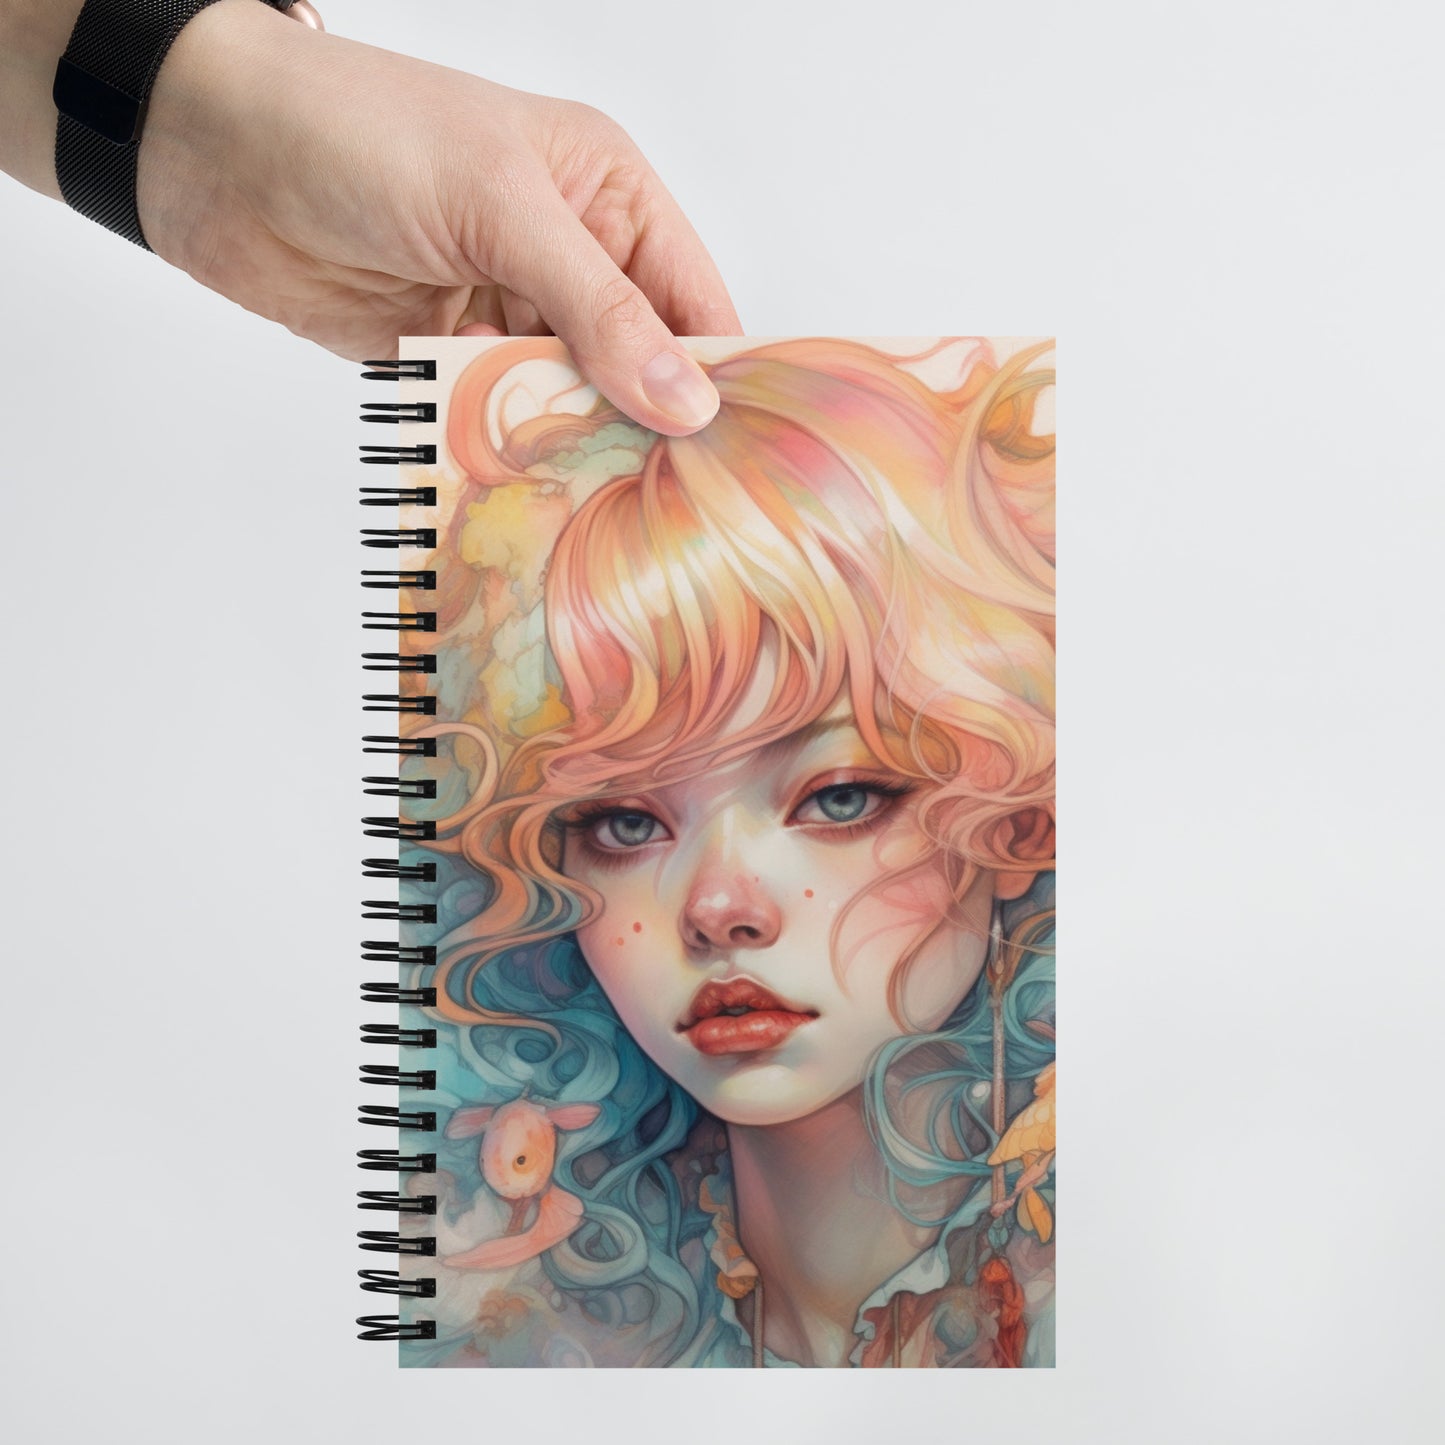 PASTEL GIRL SPIRAL DOTTED NOTEBOOK SERIES